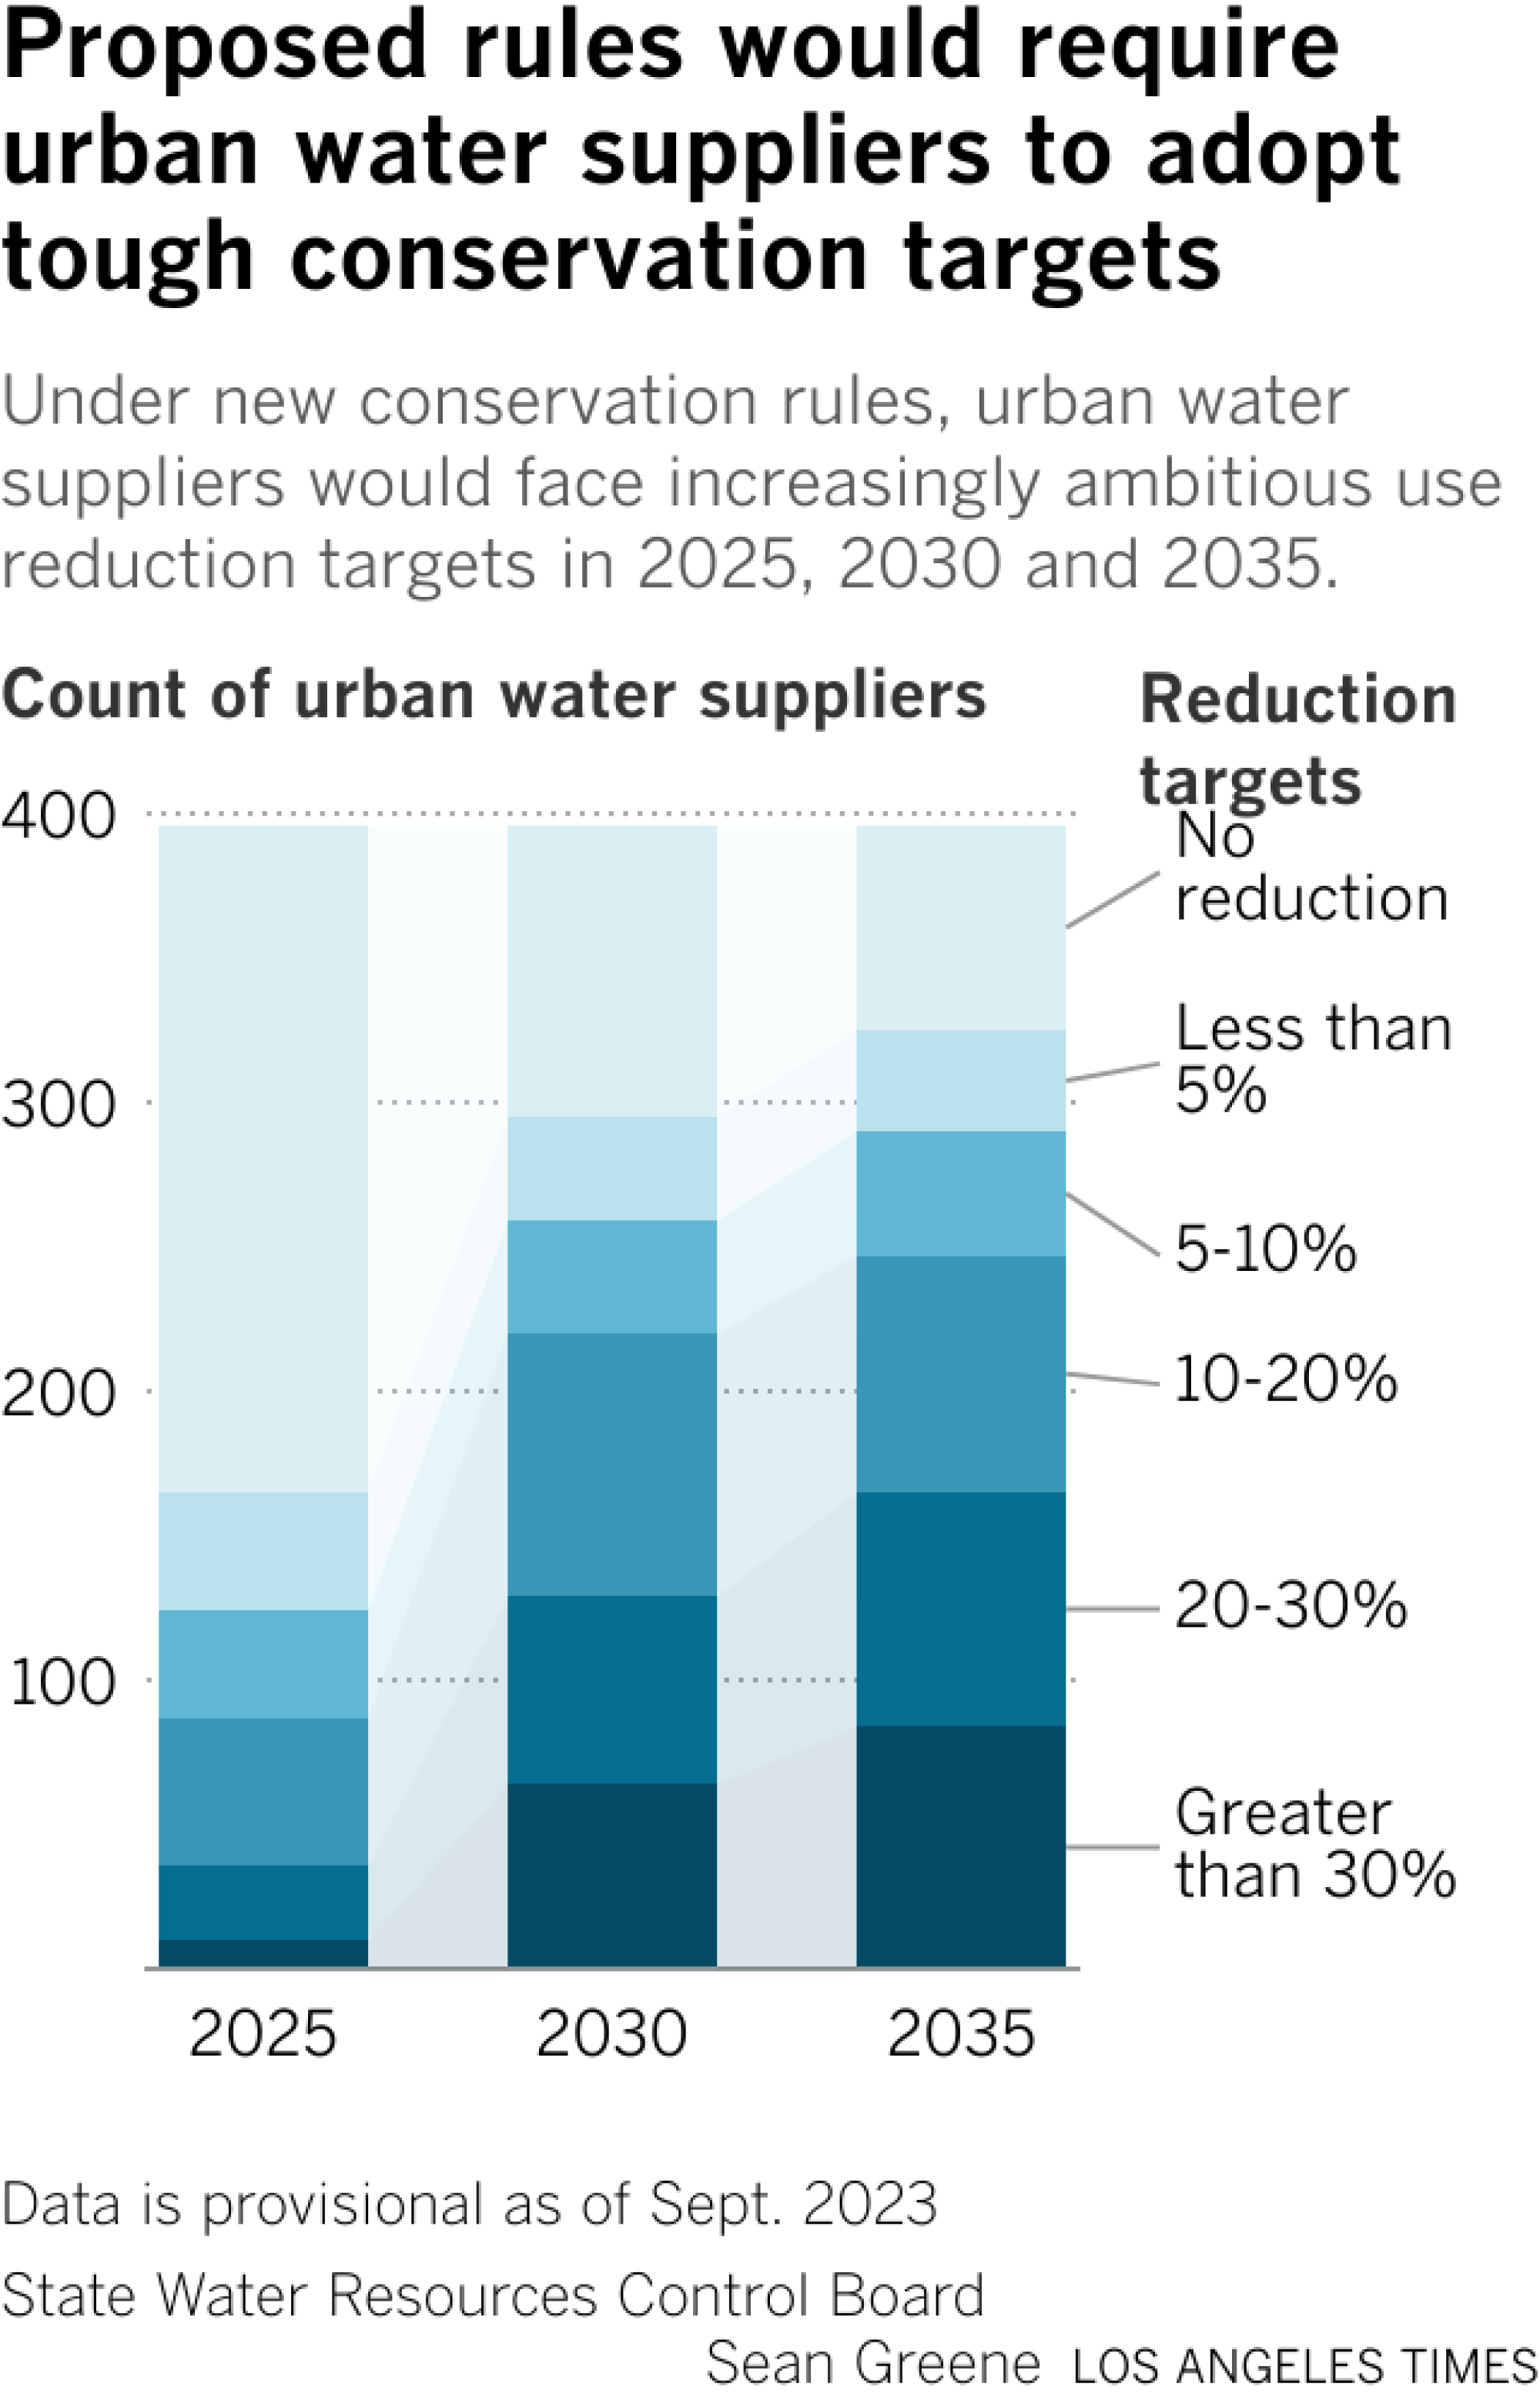 In 2025, the majority of urban water suppliers will not have to reduce their water use while 10 will have to make cuts greater than 30%. By 2035, about 75% of suppliers will need to reduce water use by 5% or more.